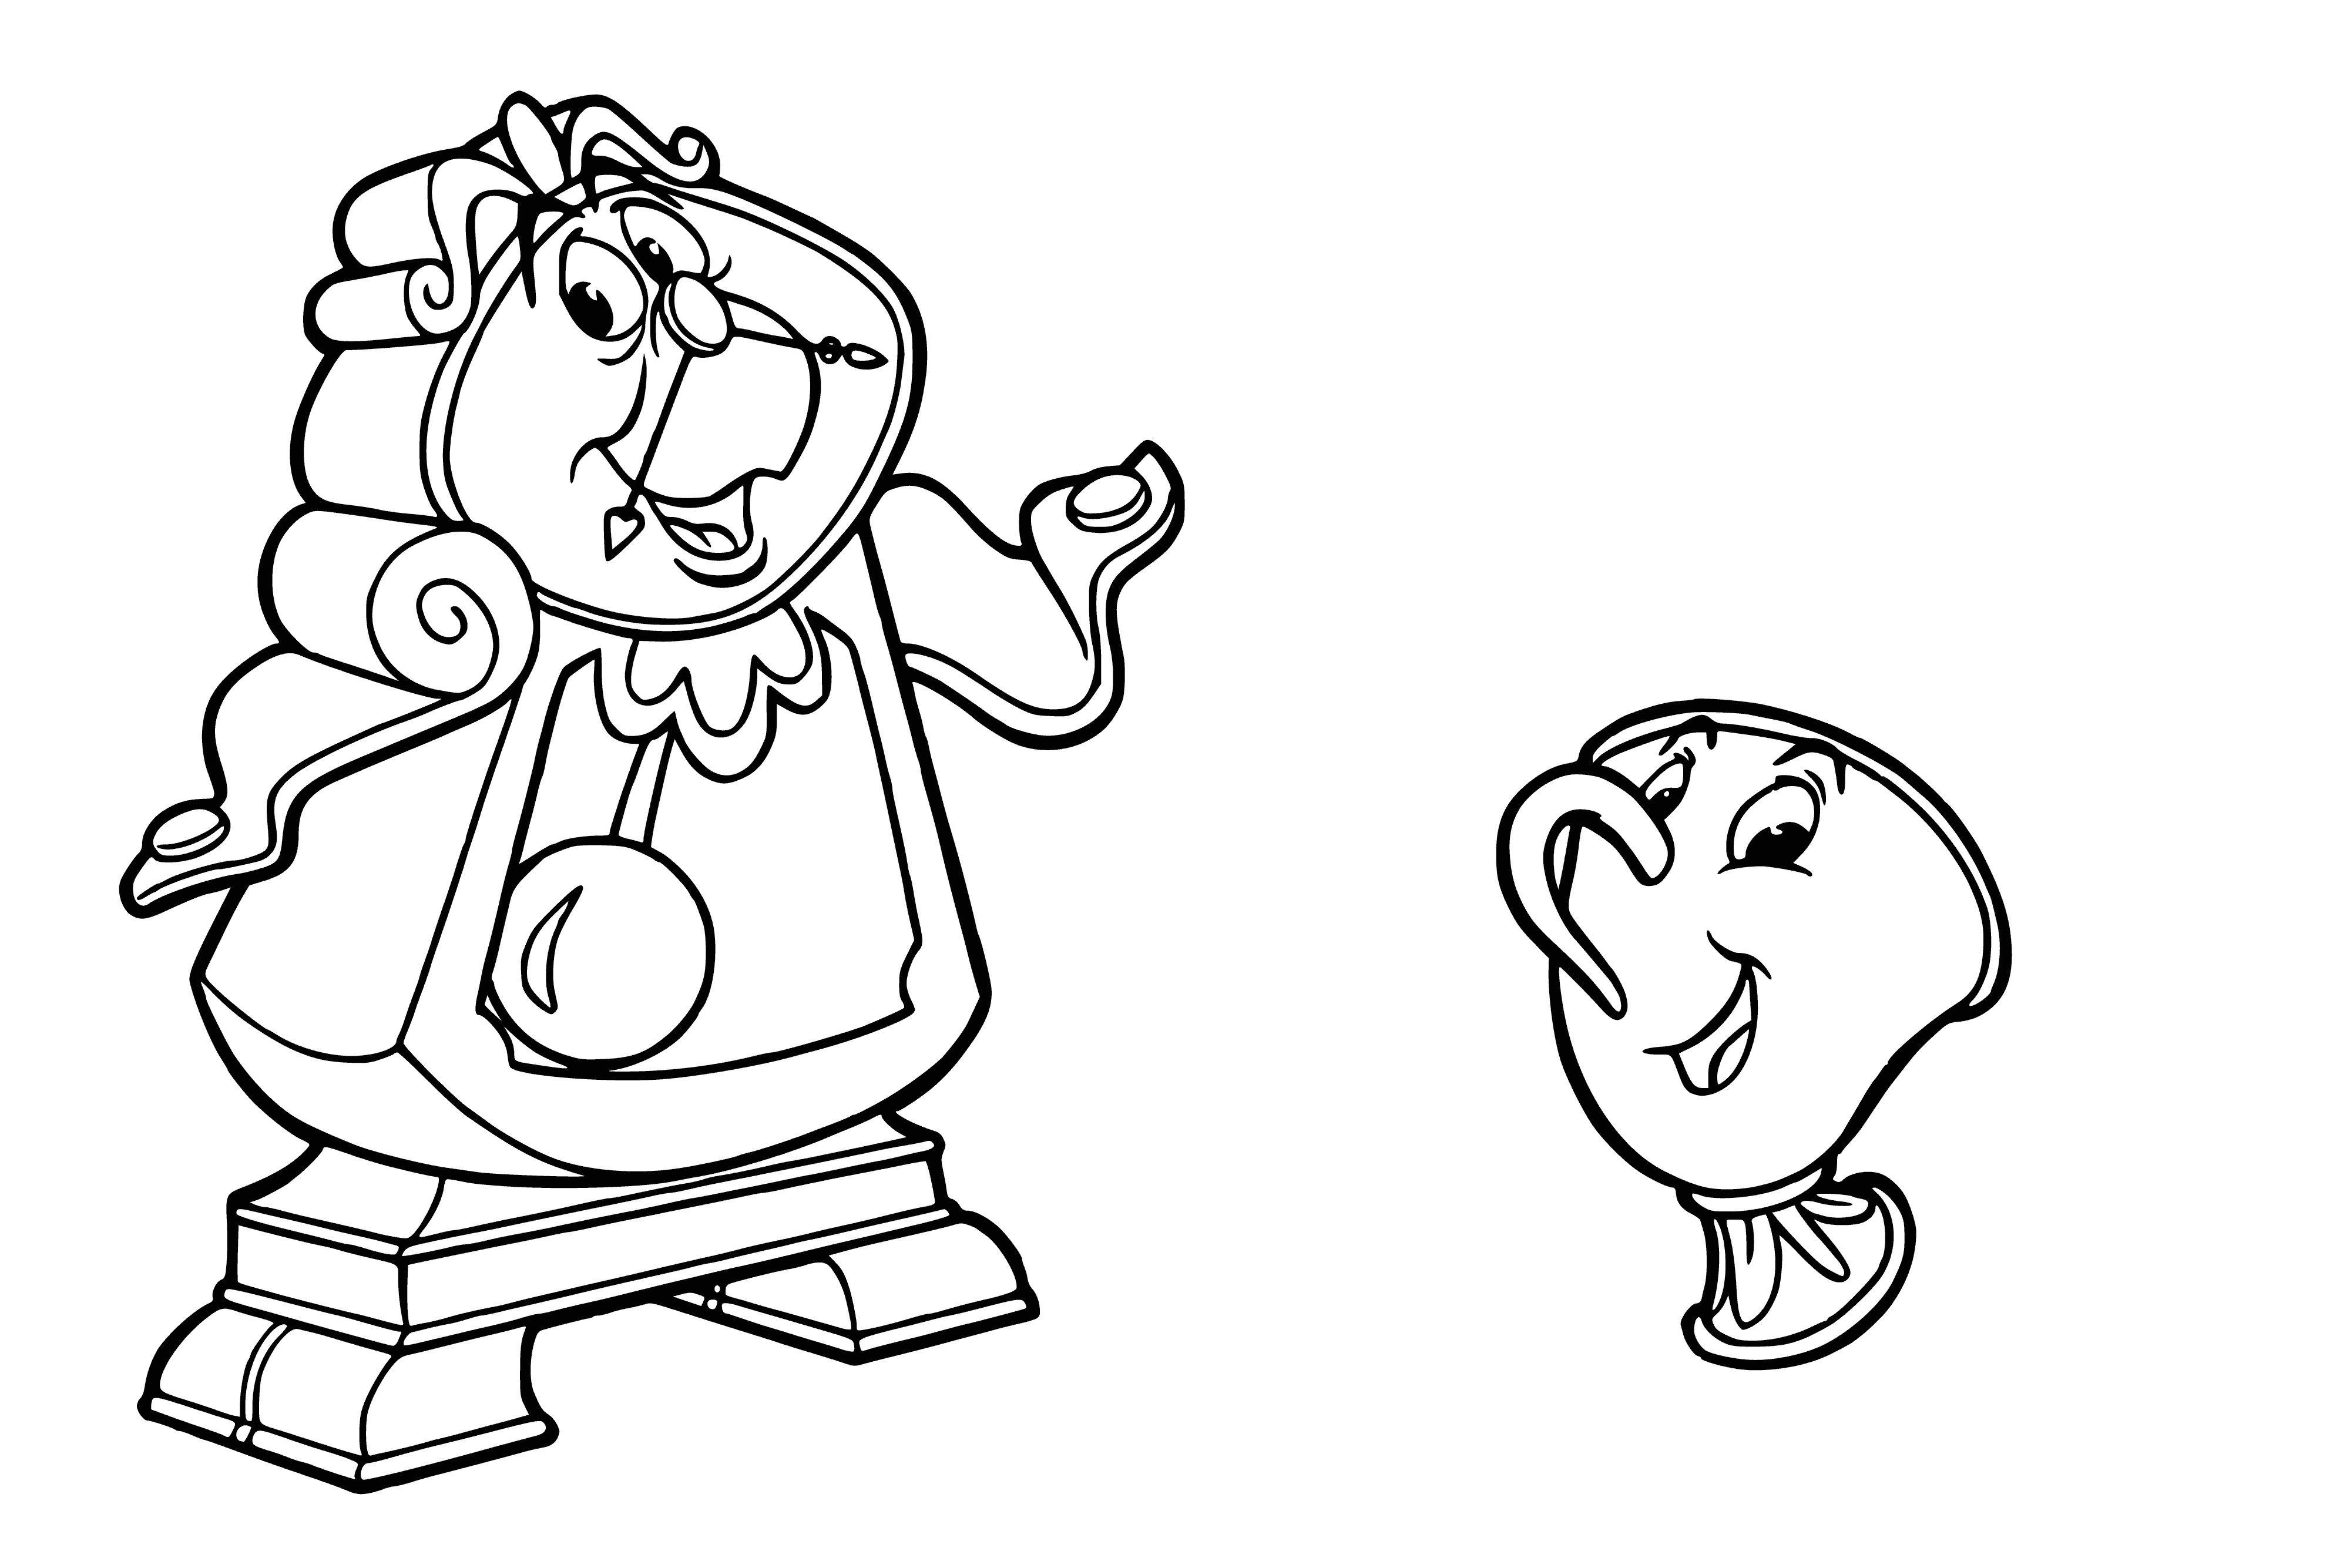 coloring page: Coloring page from Disney's 1991 "Beauty and Beast" movie; Cogsworth, a mantel clock, and Chip, a human-turned-teacup, wearing blue & gold uniforms, with Cogsworth looking stern and Chip looking innocent.